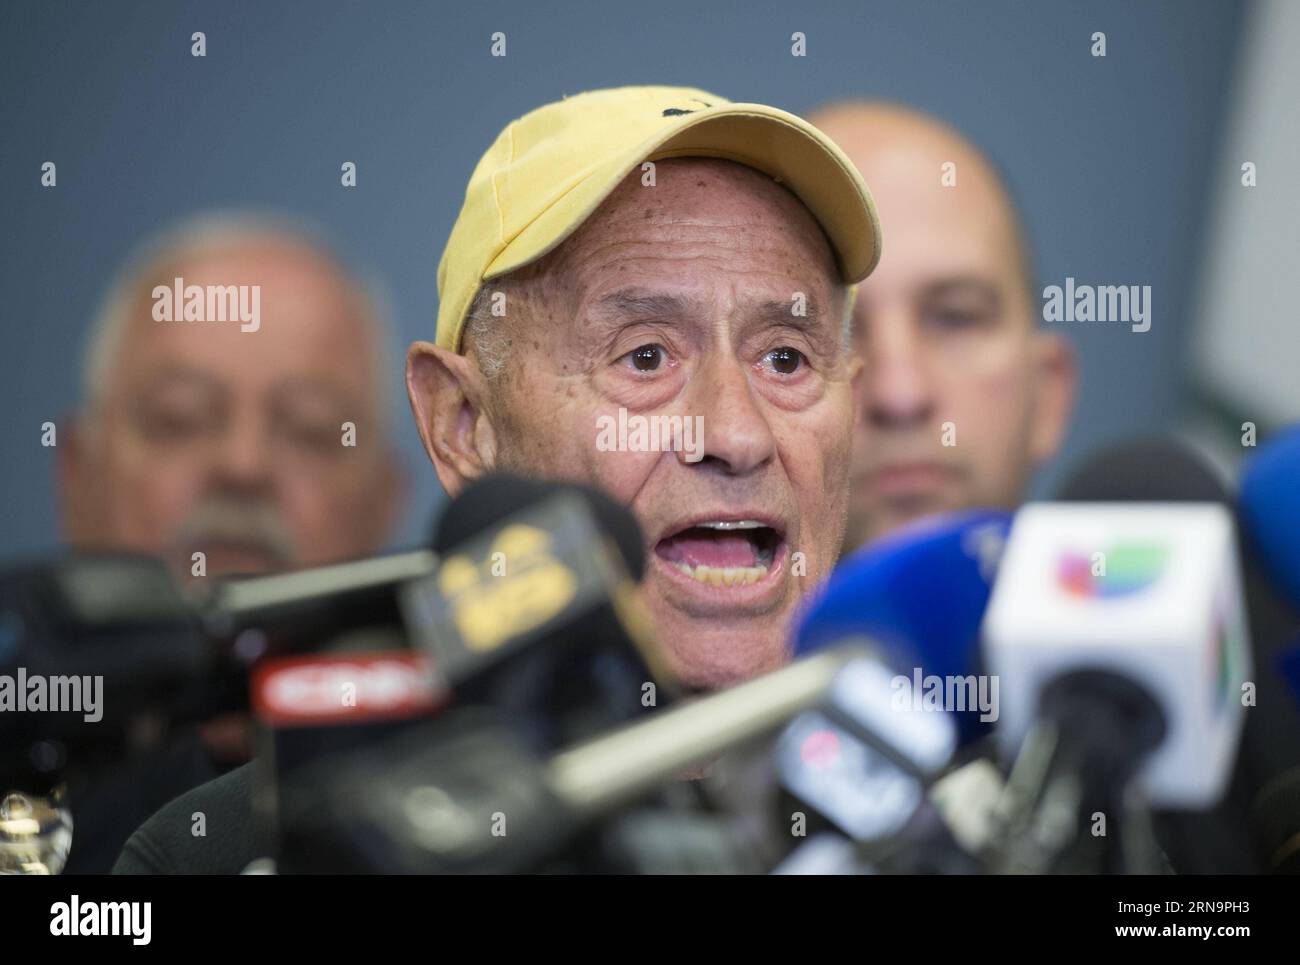 (151215) -- LOS ANGELES, Dec. 15, 2015 -- Schools Superintendent Ramon Cortines speaks to the media, in Los Angeles, the United States, on Dec. 15, 2015. All Los Angeles Unified School District (LAUSD) schools will stay closed today in response to a reported bomb threat, Schools Superintendent Ramon Cortines said. Police said the threat was called in to a School Board member. The threat is involving backpacks and packages left at campuses. The closures applied to all LAUSD campuses, around 900 of them. Los Angeles Unified School District is the second-largest school district in United States, Stock Photo